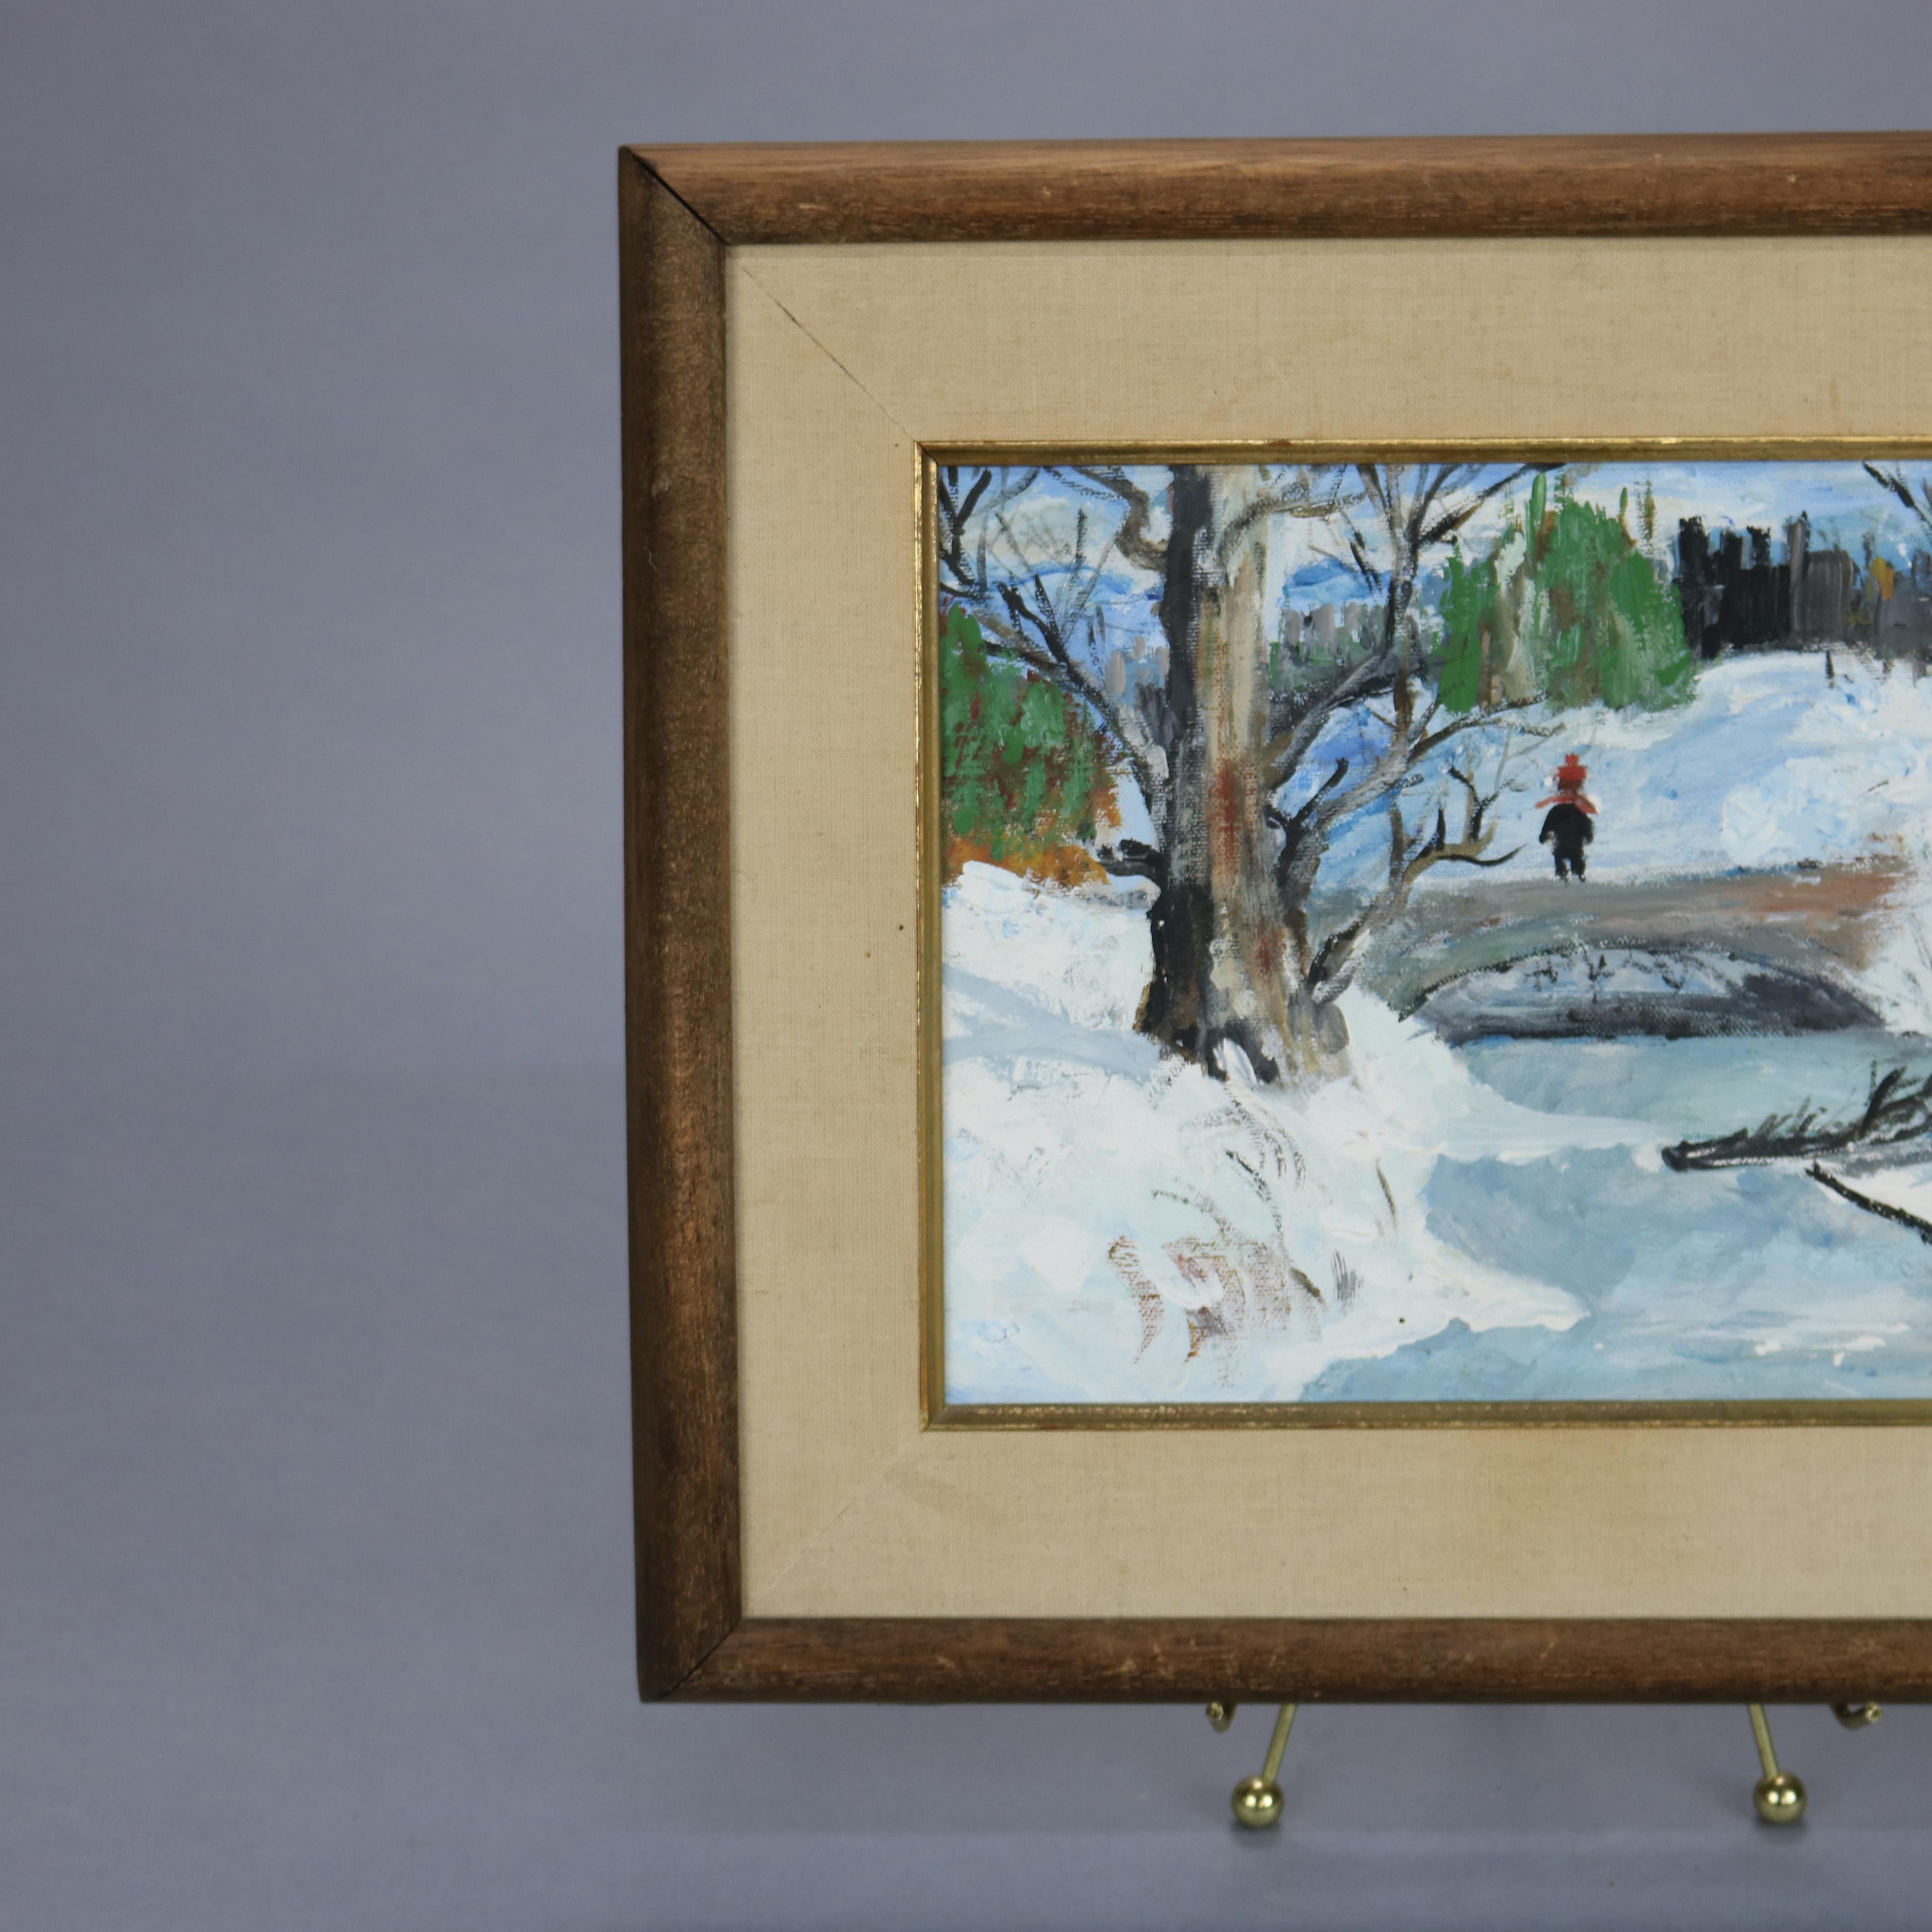 An oil on canvas impressionistic painting, possibly New Hope, depicts winter landscape with figure and city skyline in background, signed lower right Baum, matted and framed, c1940

Measures: 14.25